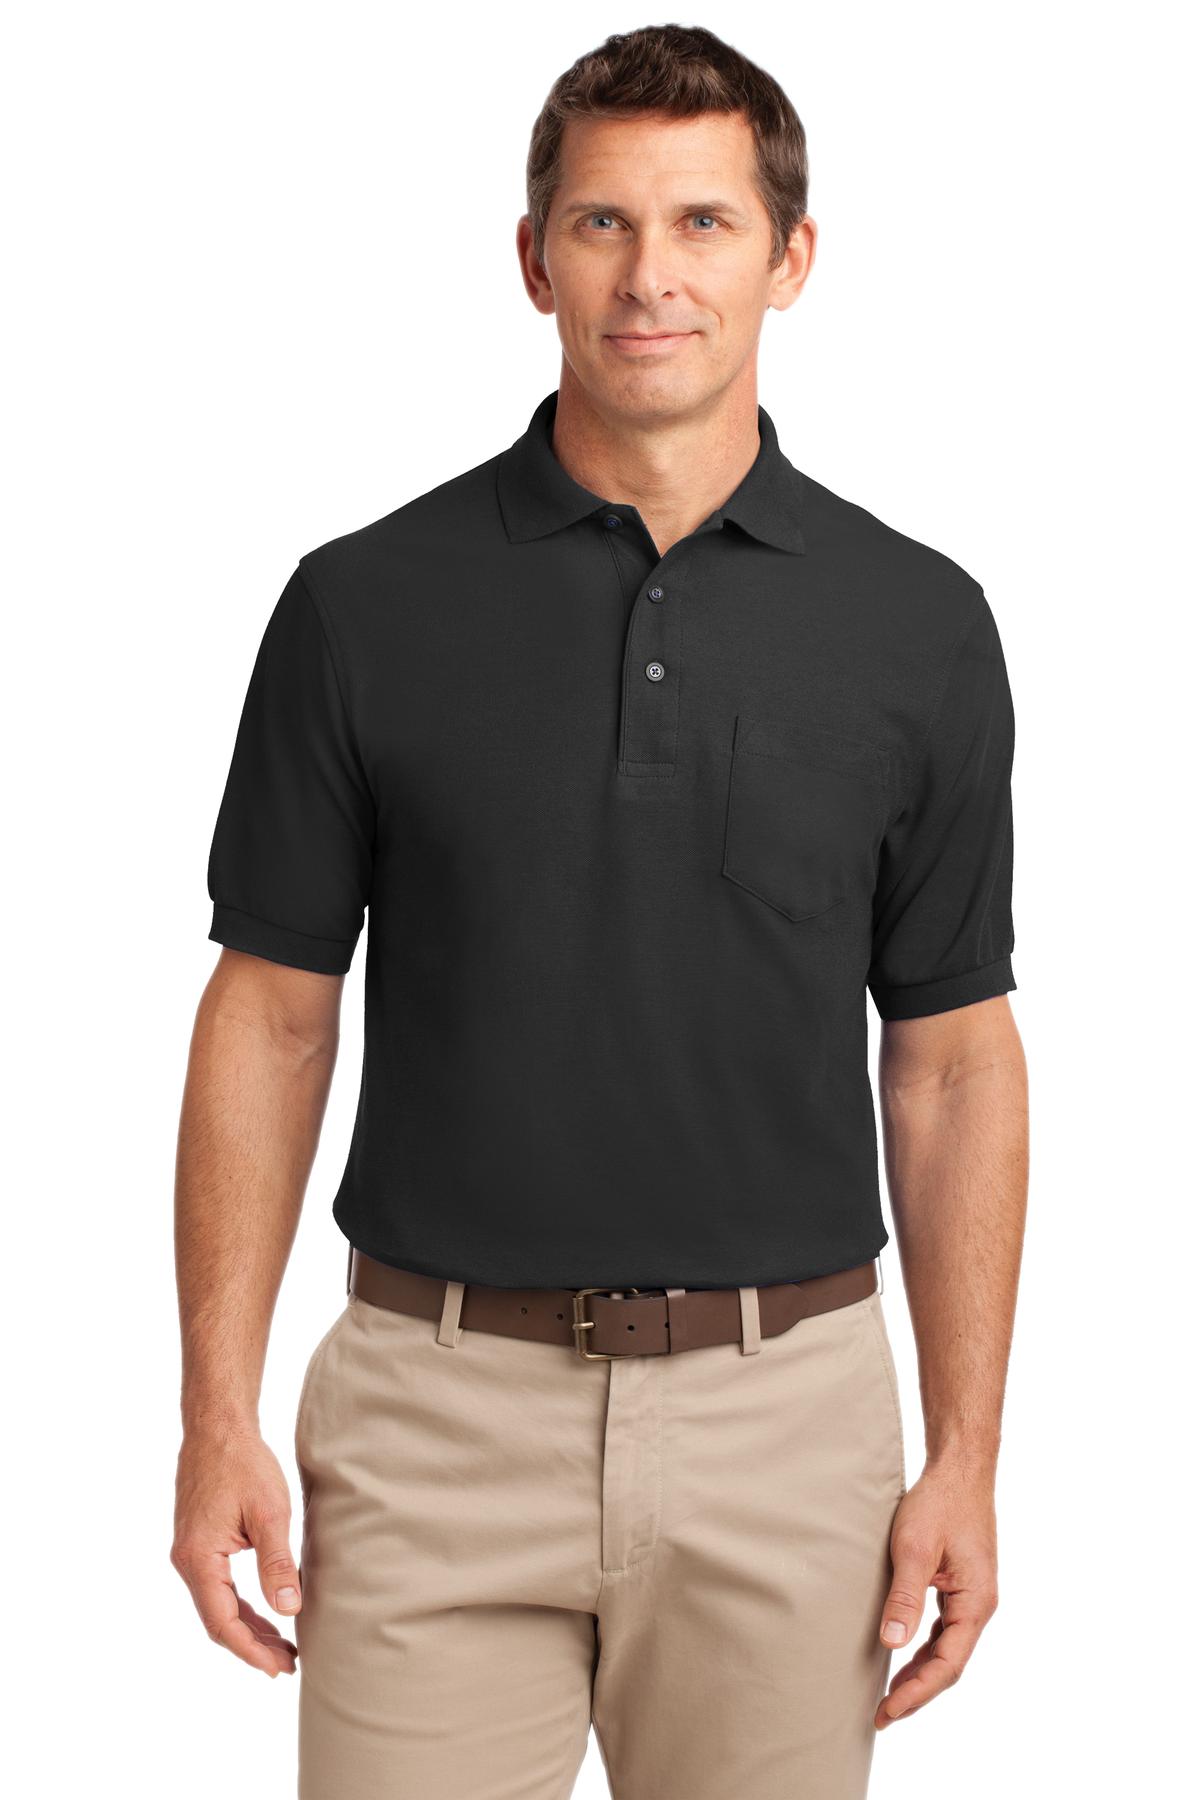 Business Casual Men Polo on Sale, UP TO ...